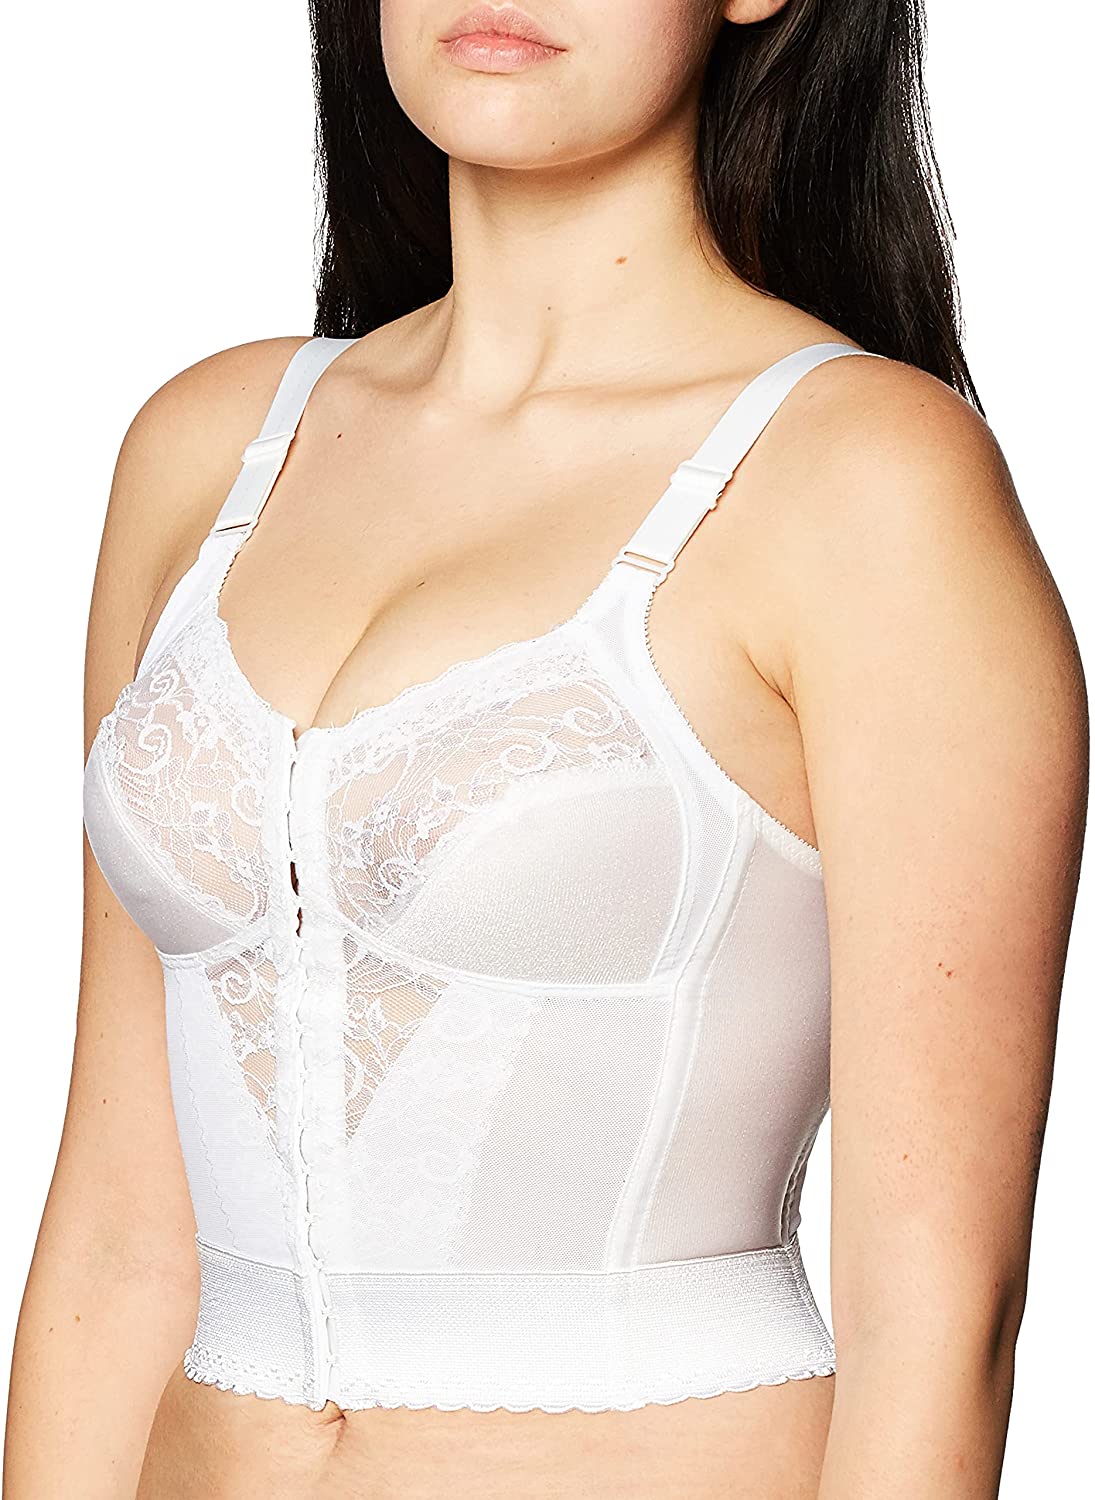 Best Front Closure Longline Bra for Sagging Breasts 8 Best Longline Bras: Sexy, Supportive & Sporty!